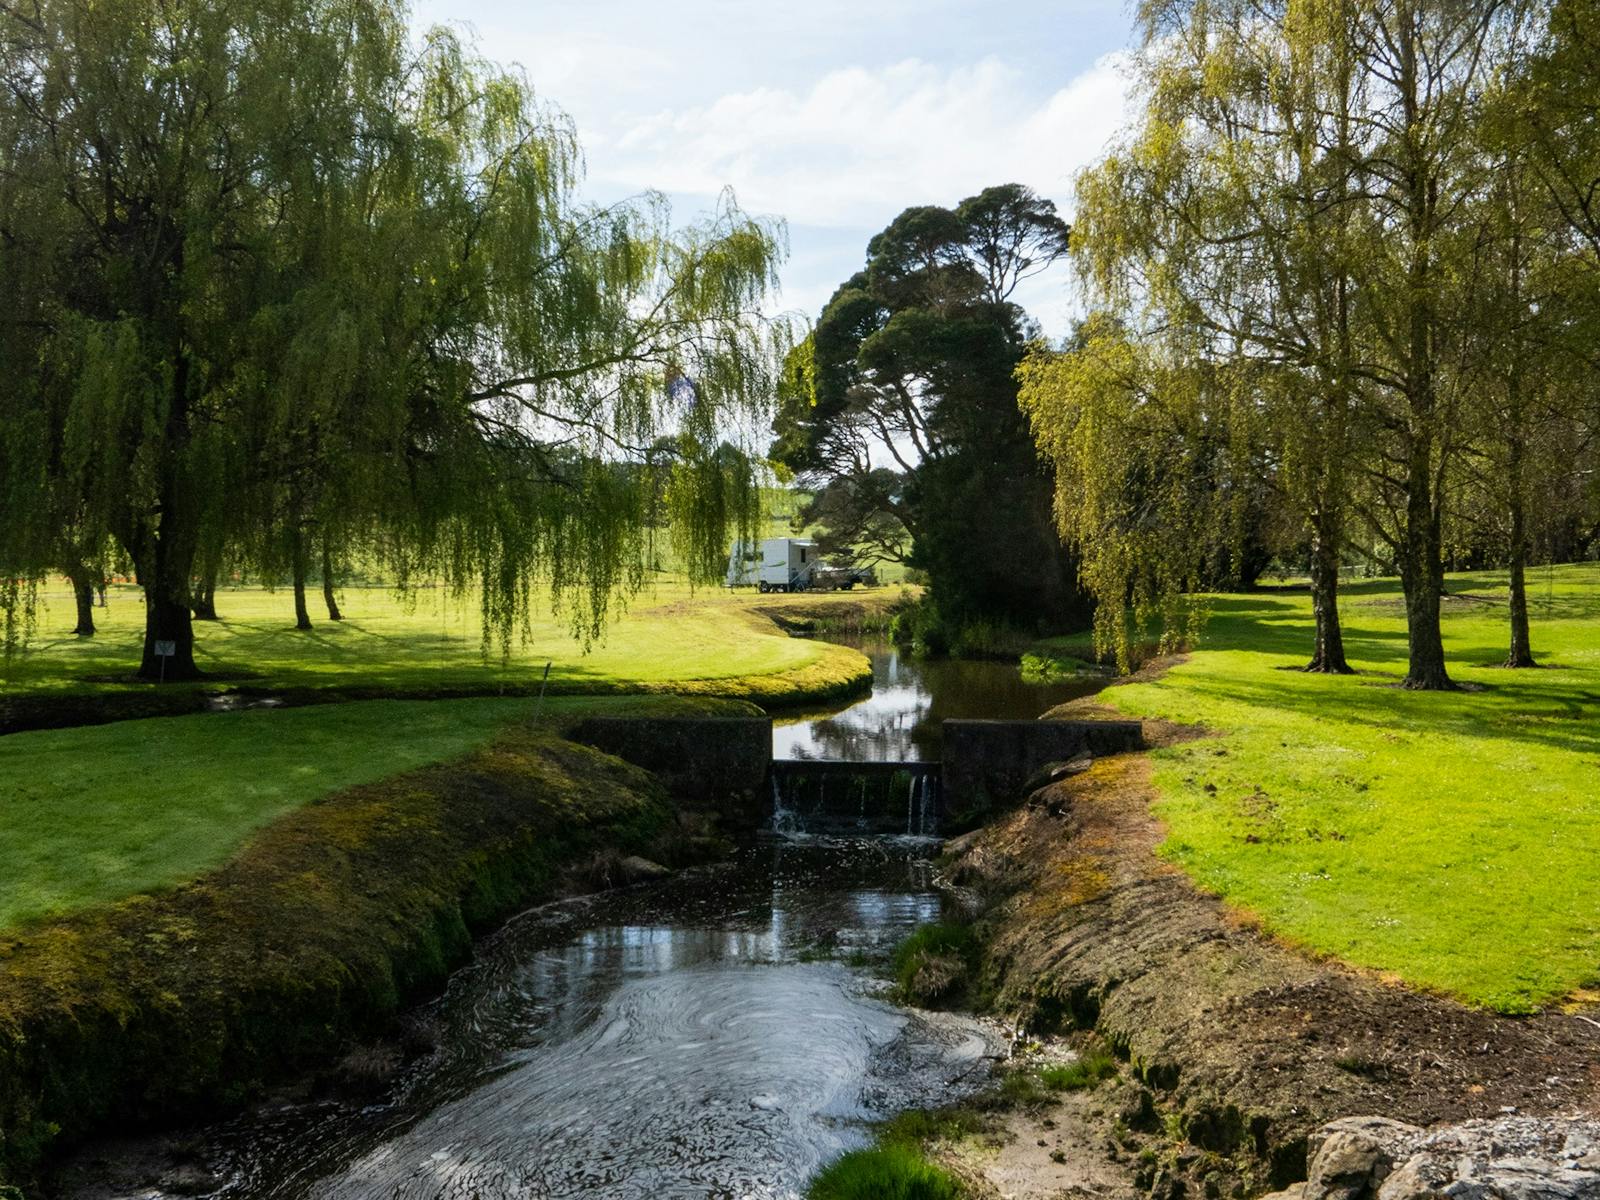 Stream with man-made level change (waterfall effect) framed on each side by trees and vibrant grass